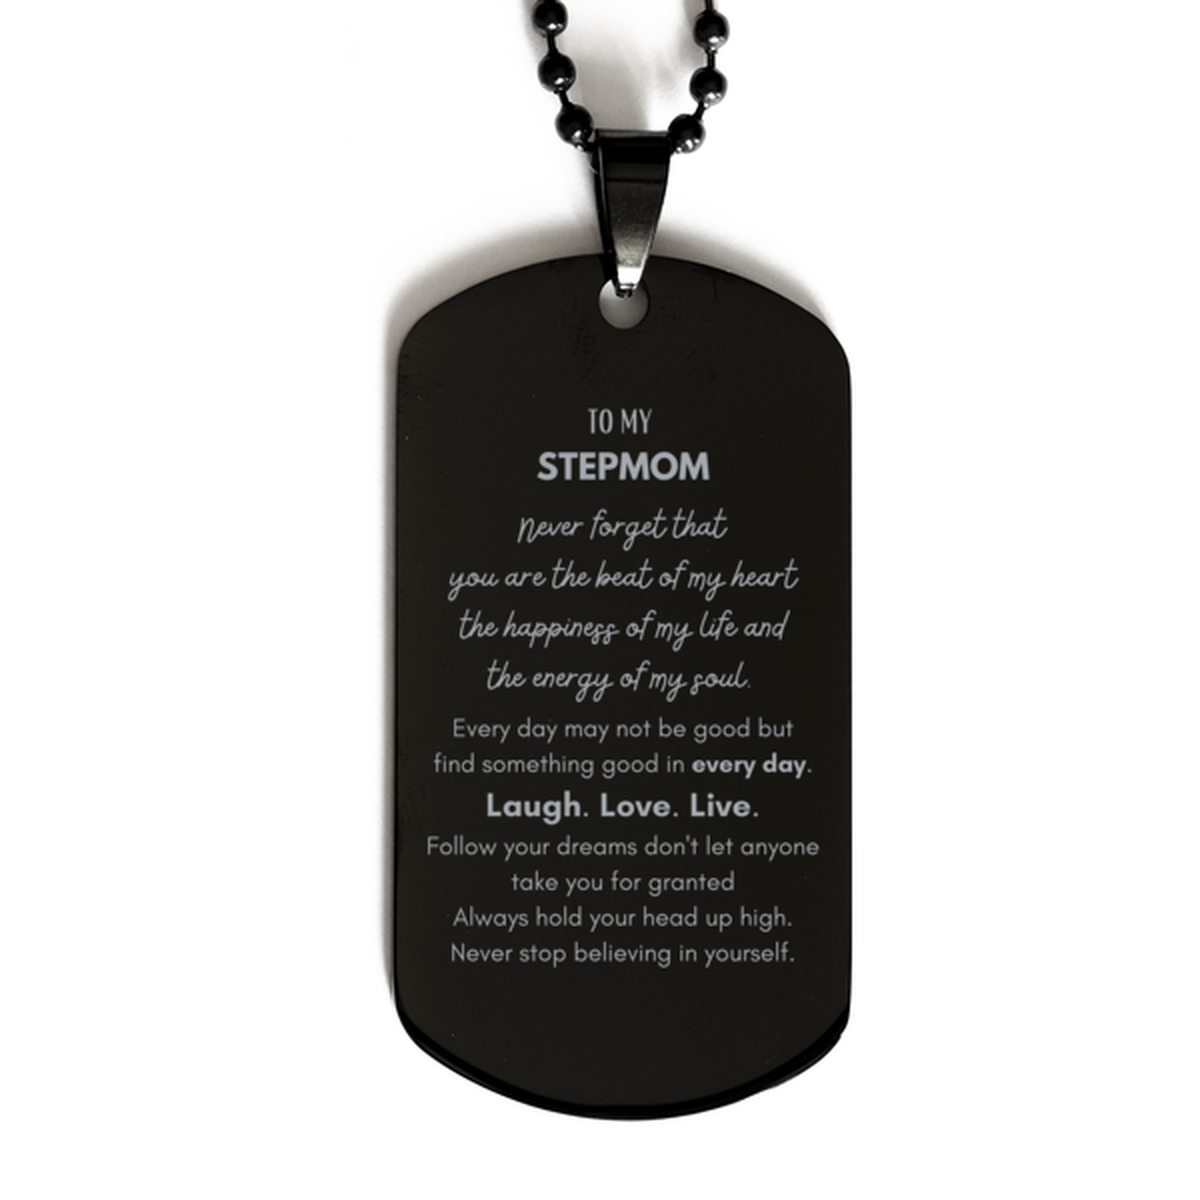 To My Stepmom Dogtag Gifts, Christmas Stepmom Black Dog Tag Present, Birthday Unique Motivational For Stepmom, To My Stepmom Never forget that you are the beat of my heart the happiness of my life and the energy of my soul